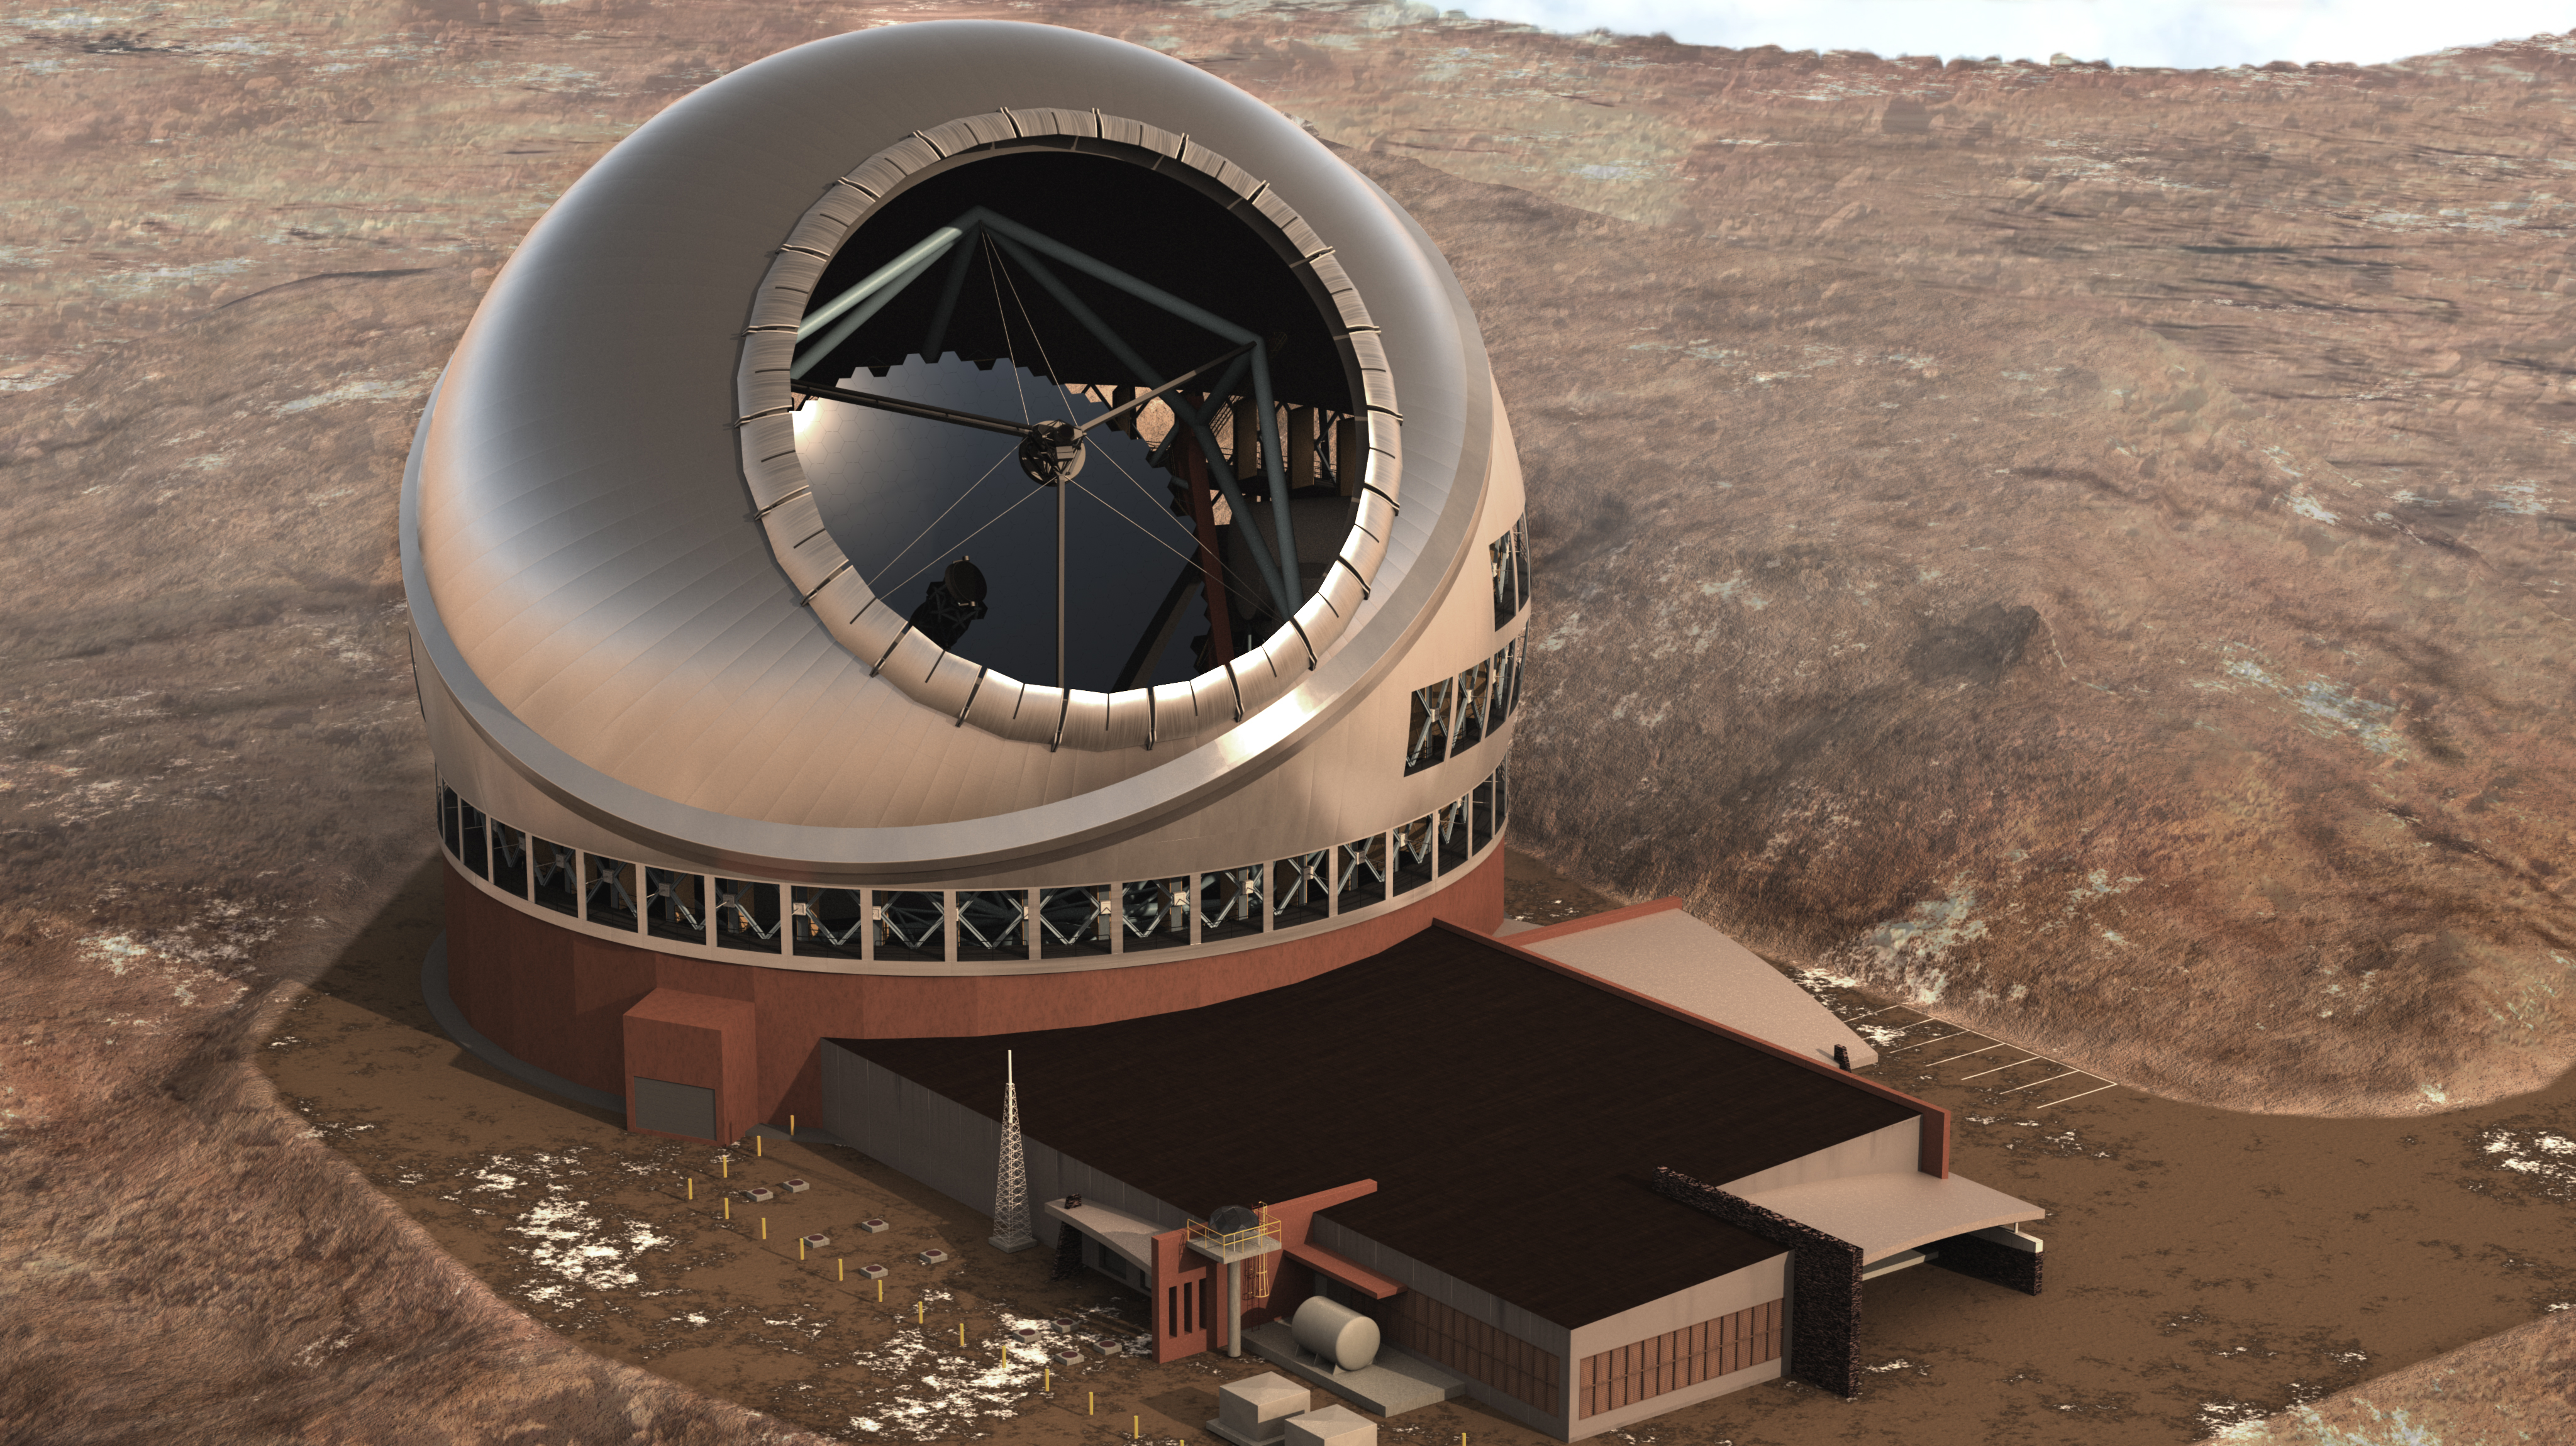 rendering of the TMT complex